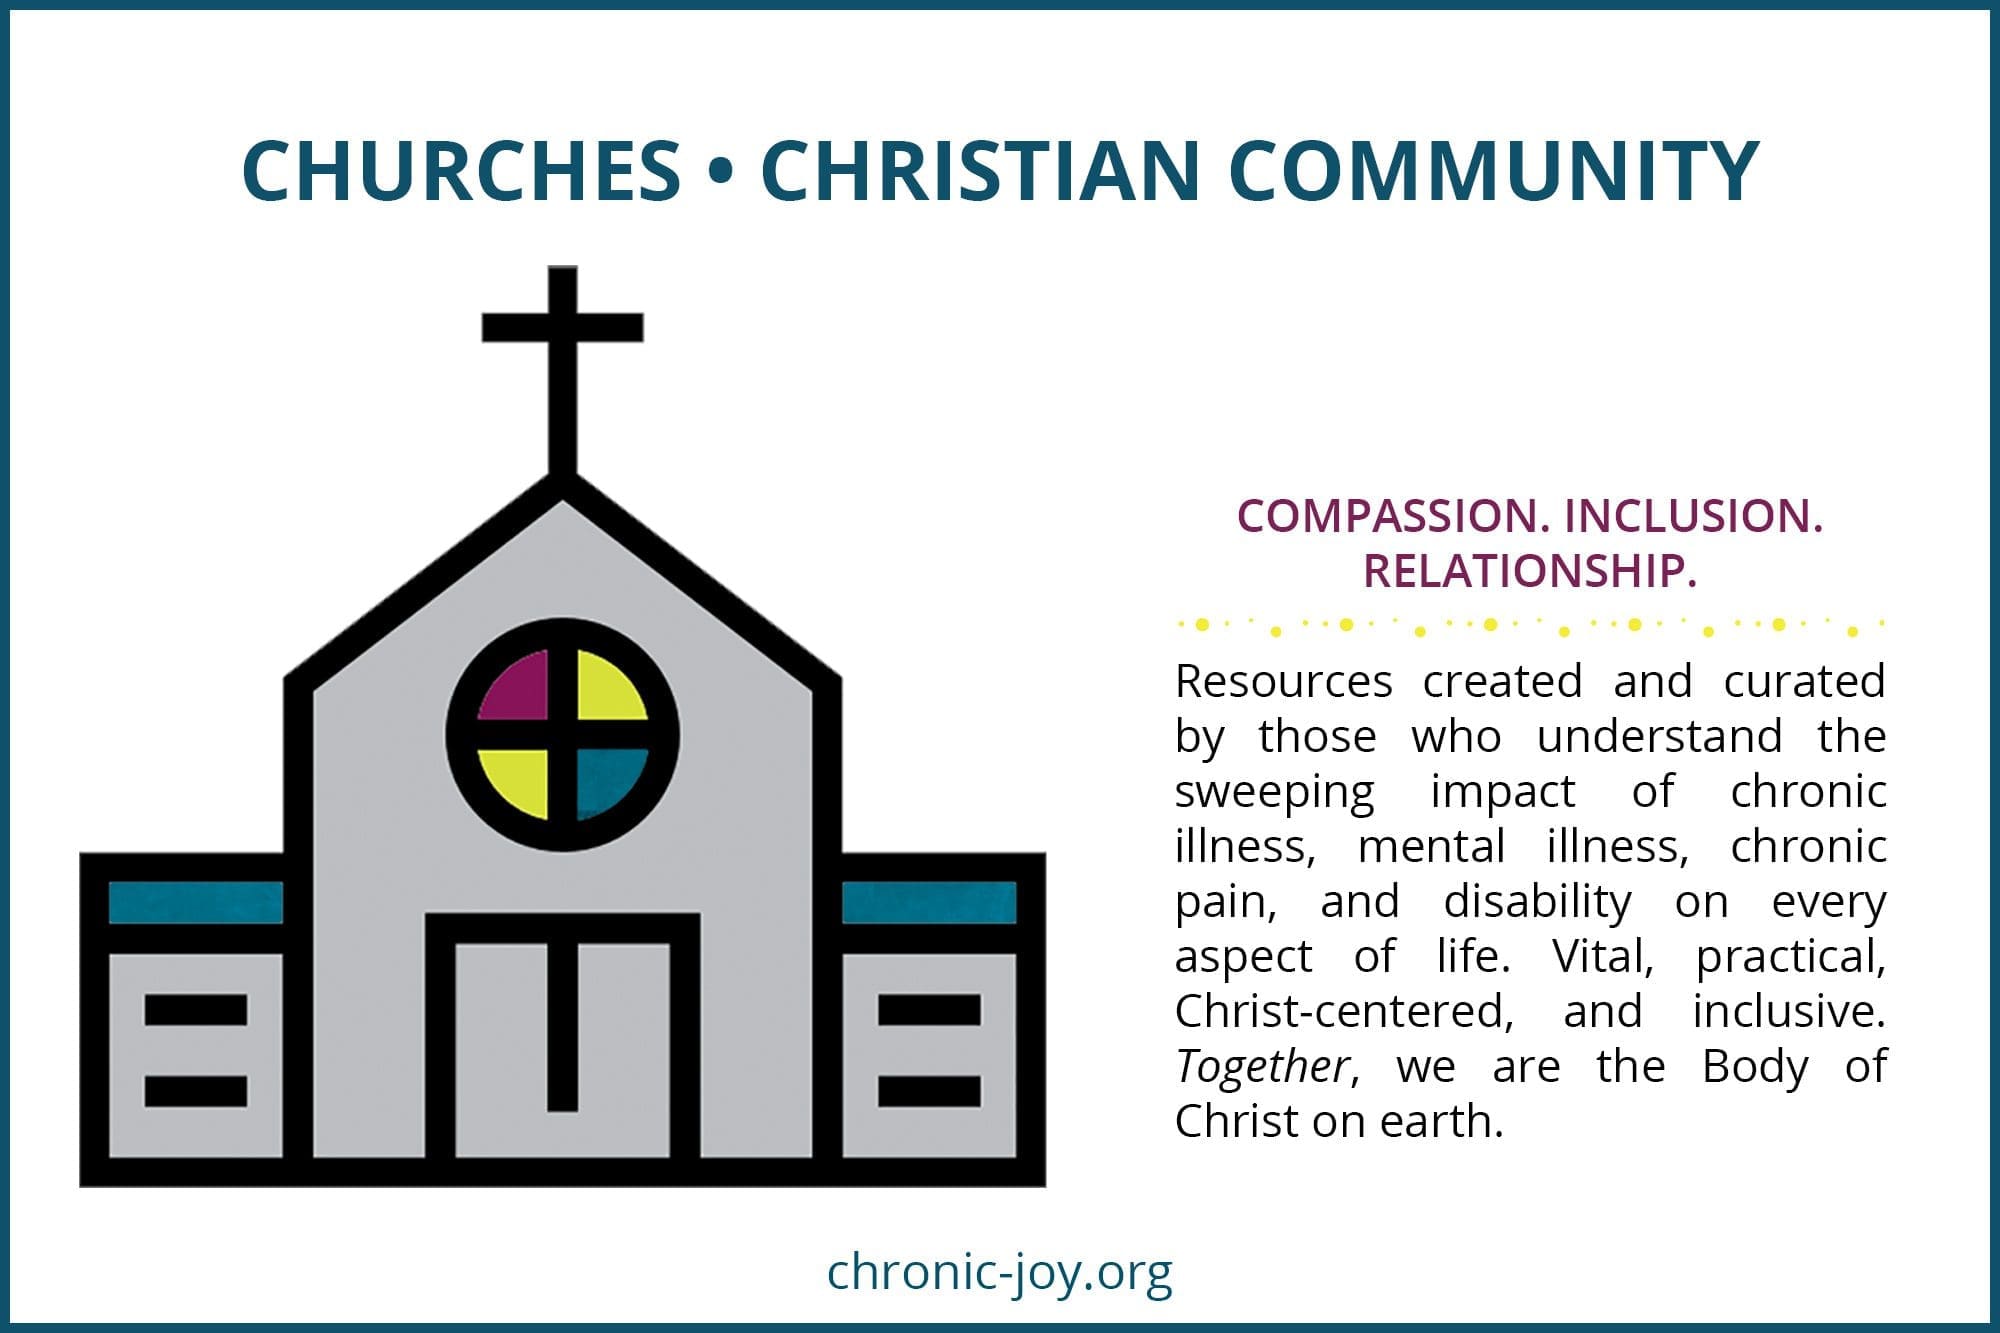 COMPASSION. INCLUSION. RELATIONSHIP. Resources created and curated by those who understand the sweeping impact of chronic illness, mental illness, chronic pain, and disability on every aspect of life. Vital, practical, Christ-centered, and inclusive. Together, we are the Body of Christ on earth.